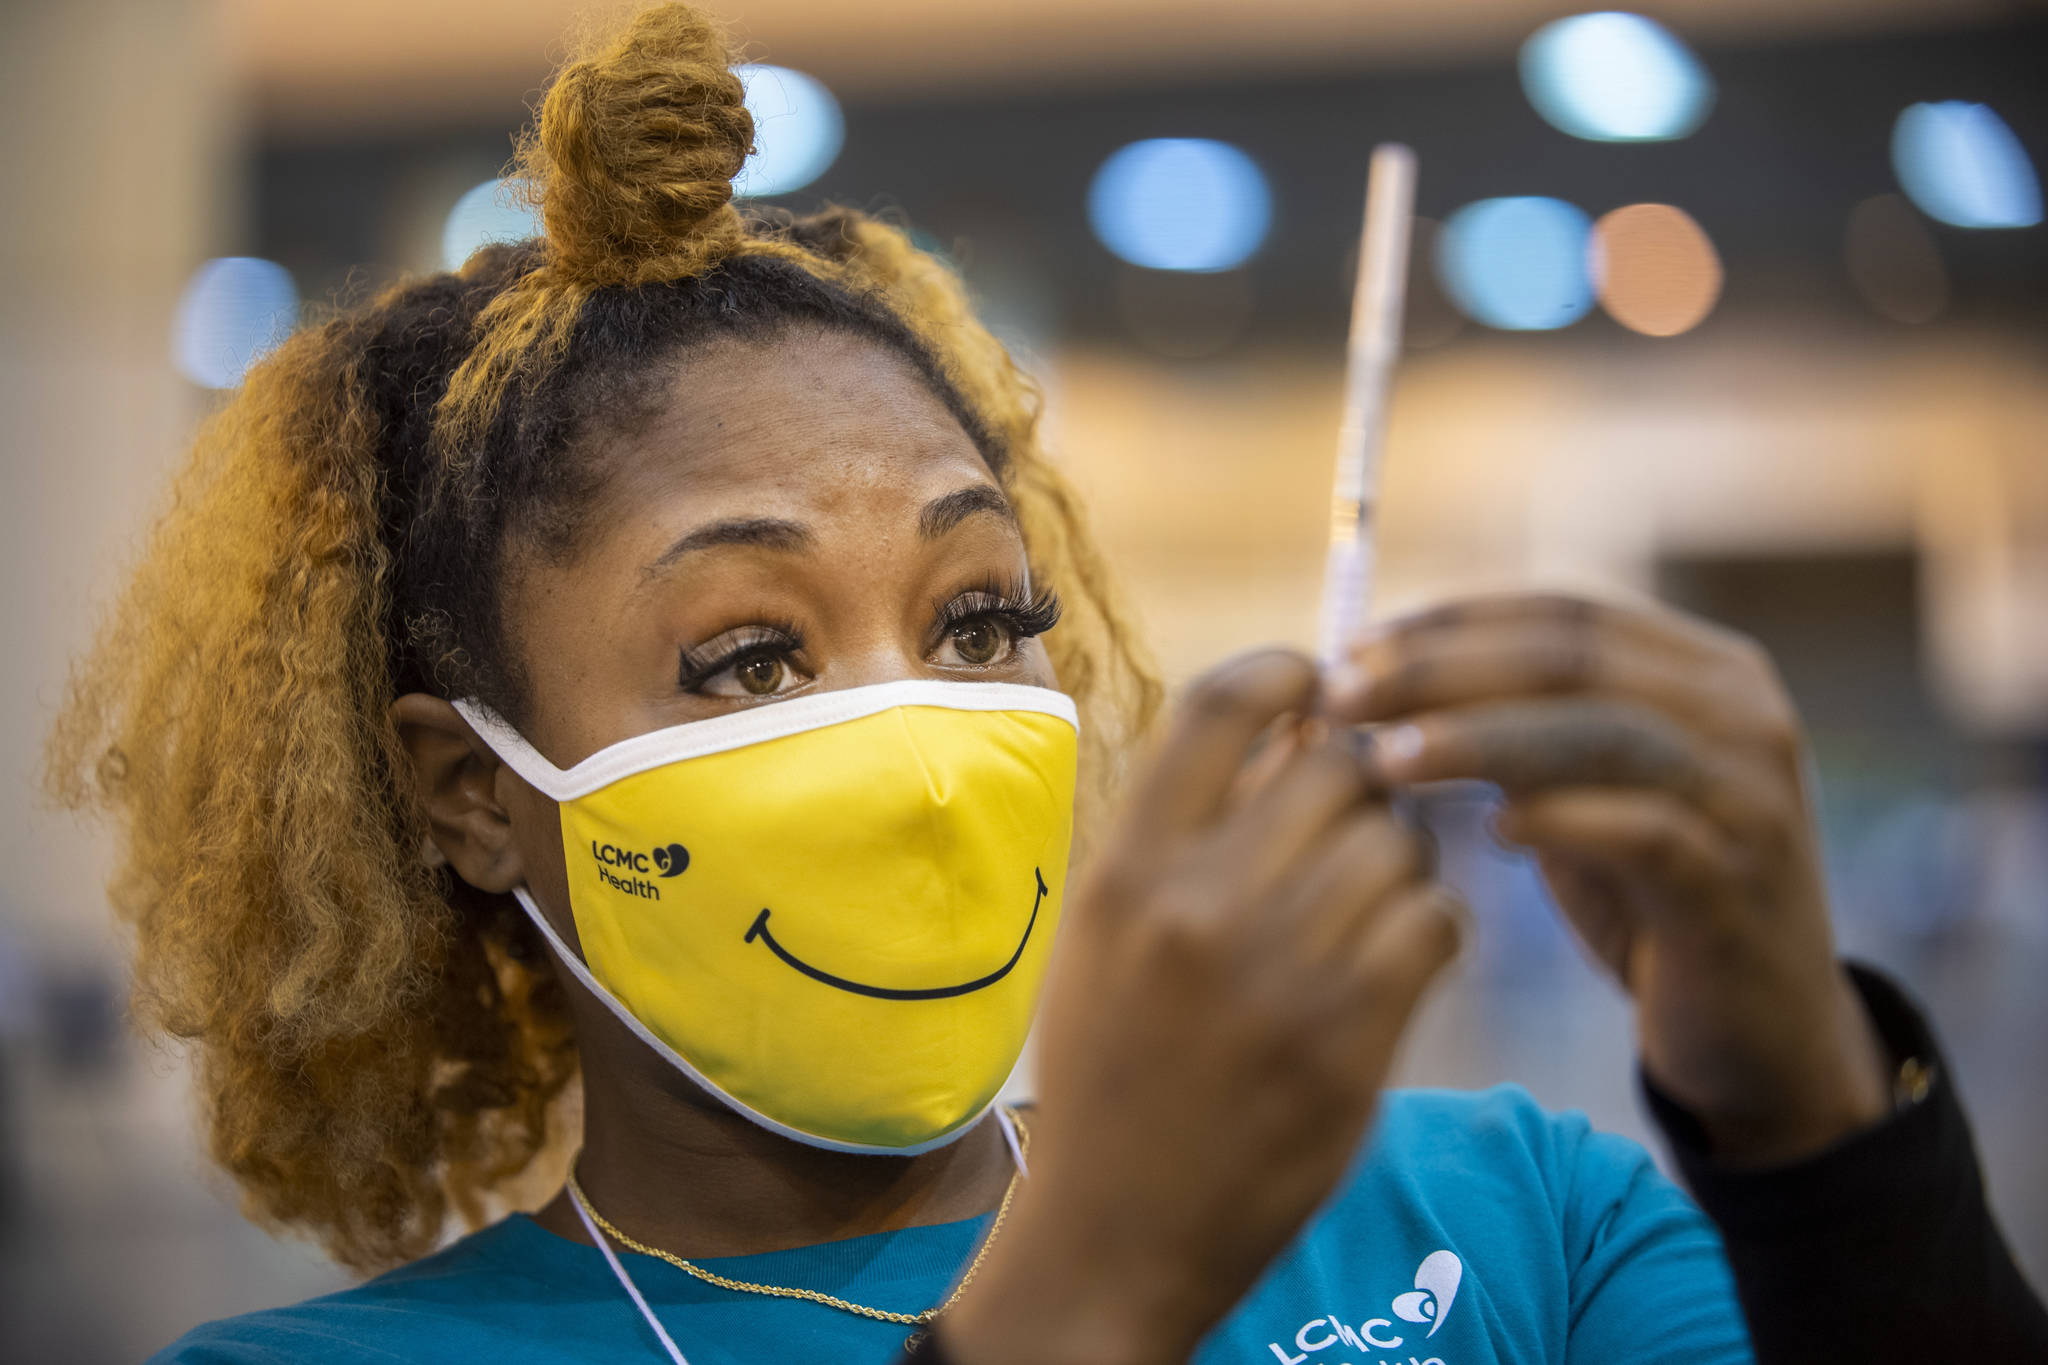 Medical Assistant Keona Shepard holds up the Johnson & Johnson COVID-19 vaccine as she prepares to administer it at the New Orleans Ernest N. Morial Convention Center during the mass coronavirus vaccination in New Orleans, in this Thursday, March 4, 2021, file photo. (Chris Granger / The Advocate)